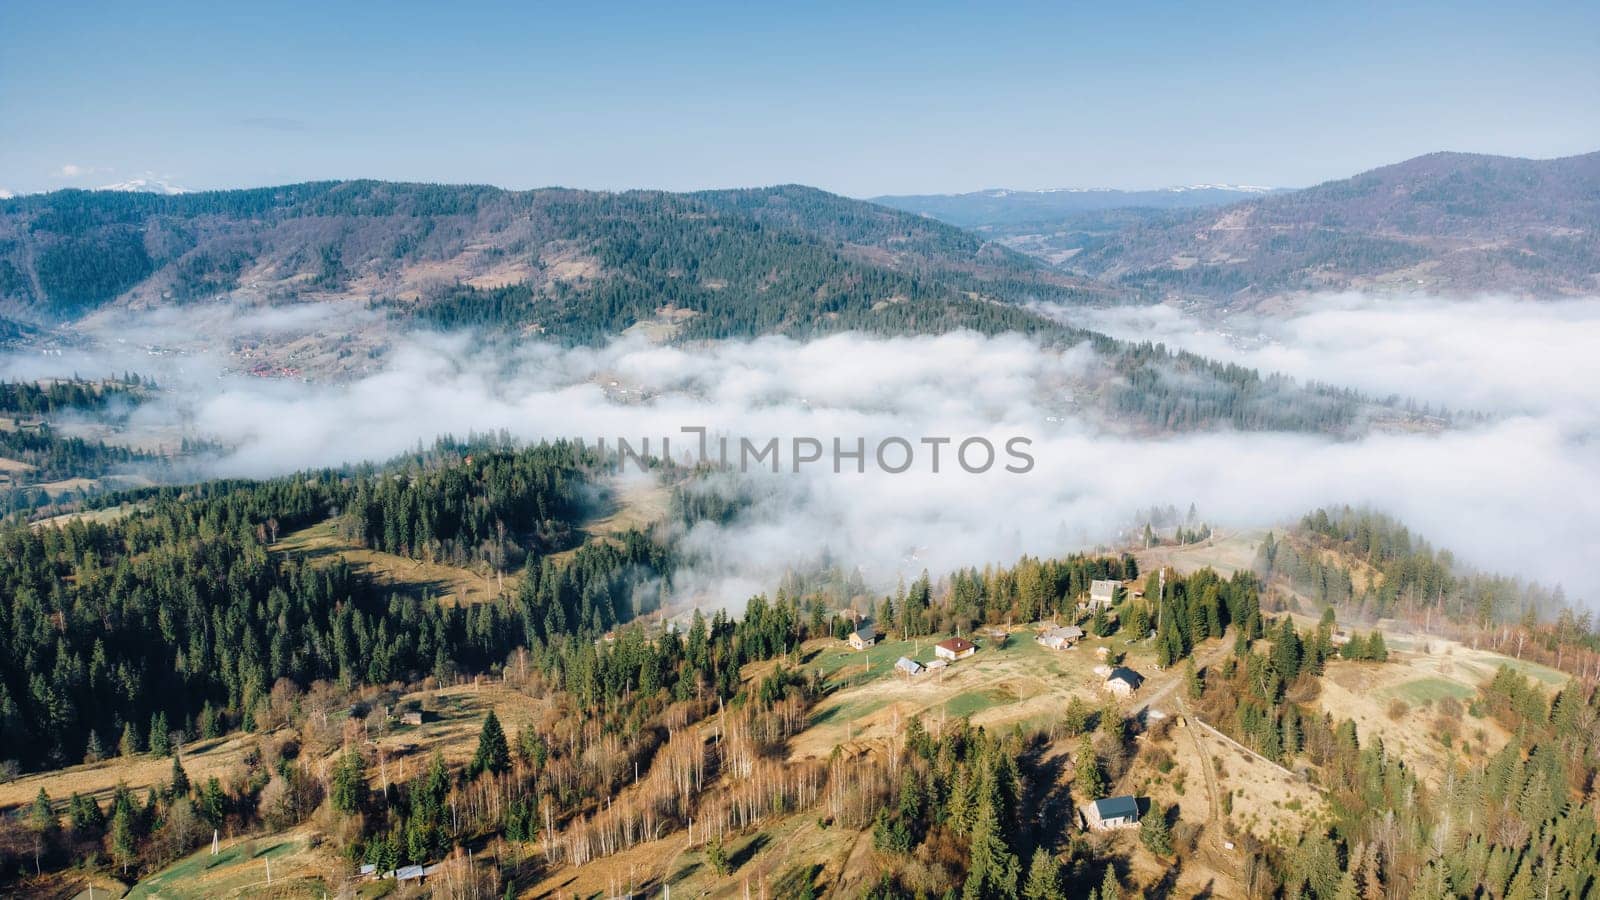 Mountains in clouds at sunrise in spring. Aerial view of mountains with green trees in fog. Beautiful landscape with hills, forest, sky. Top view from drone of mountain valley in low clouds